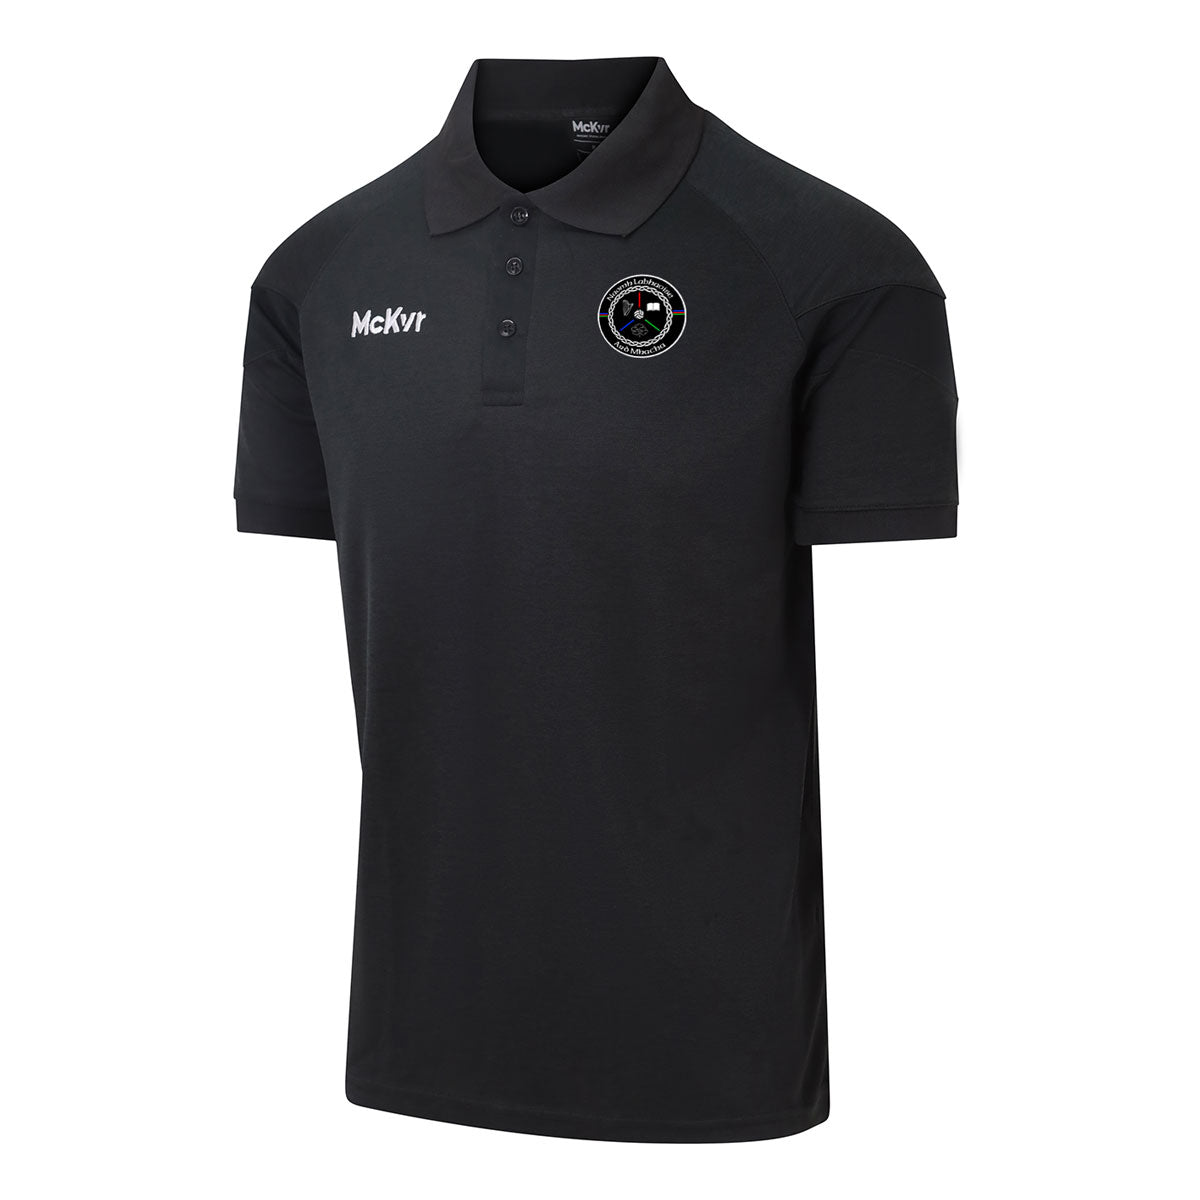 Mc Keever Naomh Labhaoise CLG Core 22 Polo Top - Adult - Black